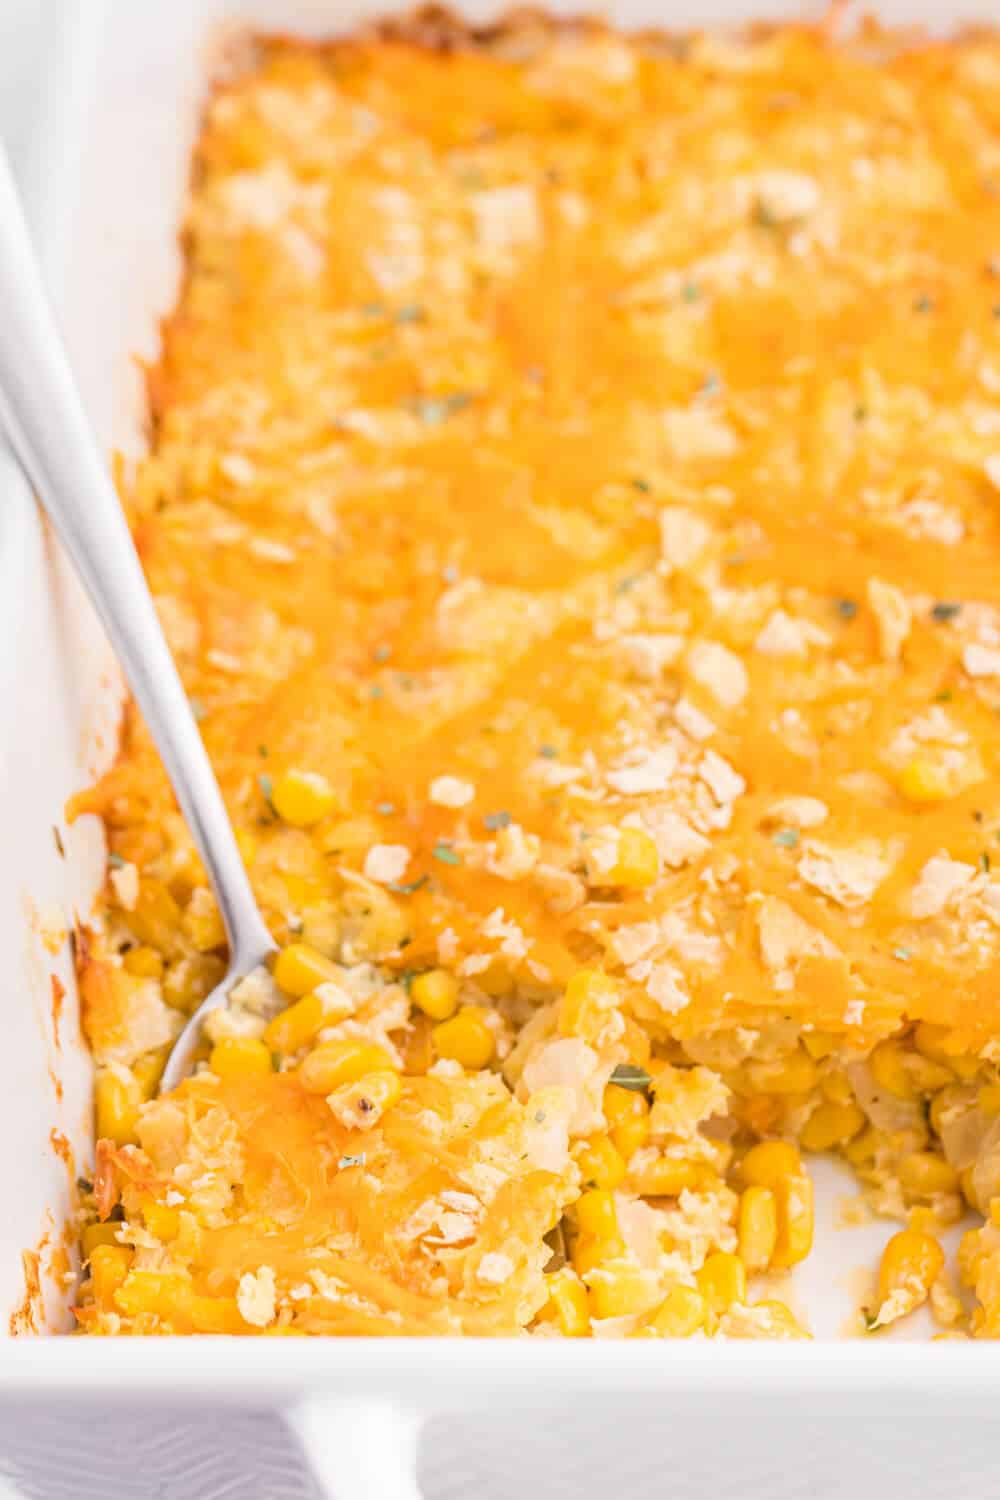 Cheesy Corn Casserole - A comforting casserole dish loaded with sweet corn, cheese and a crunchy soda cracker topping.